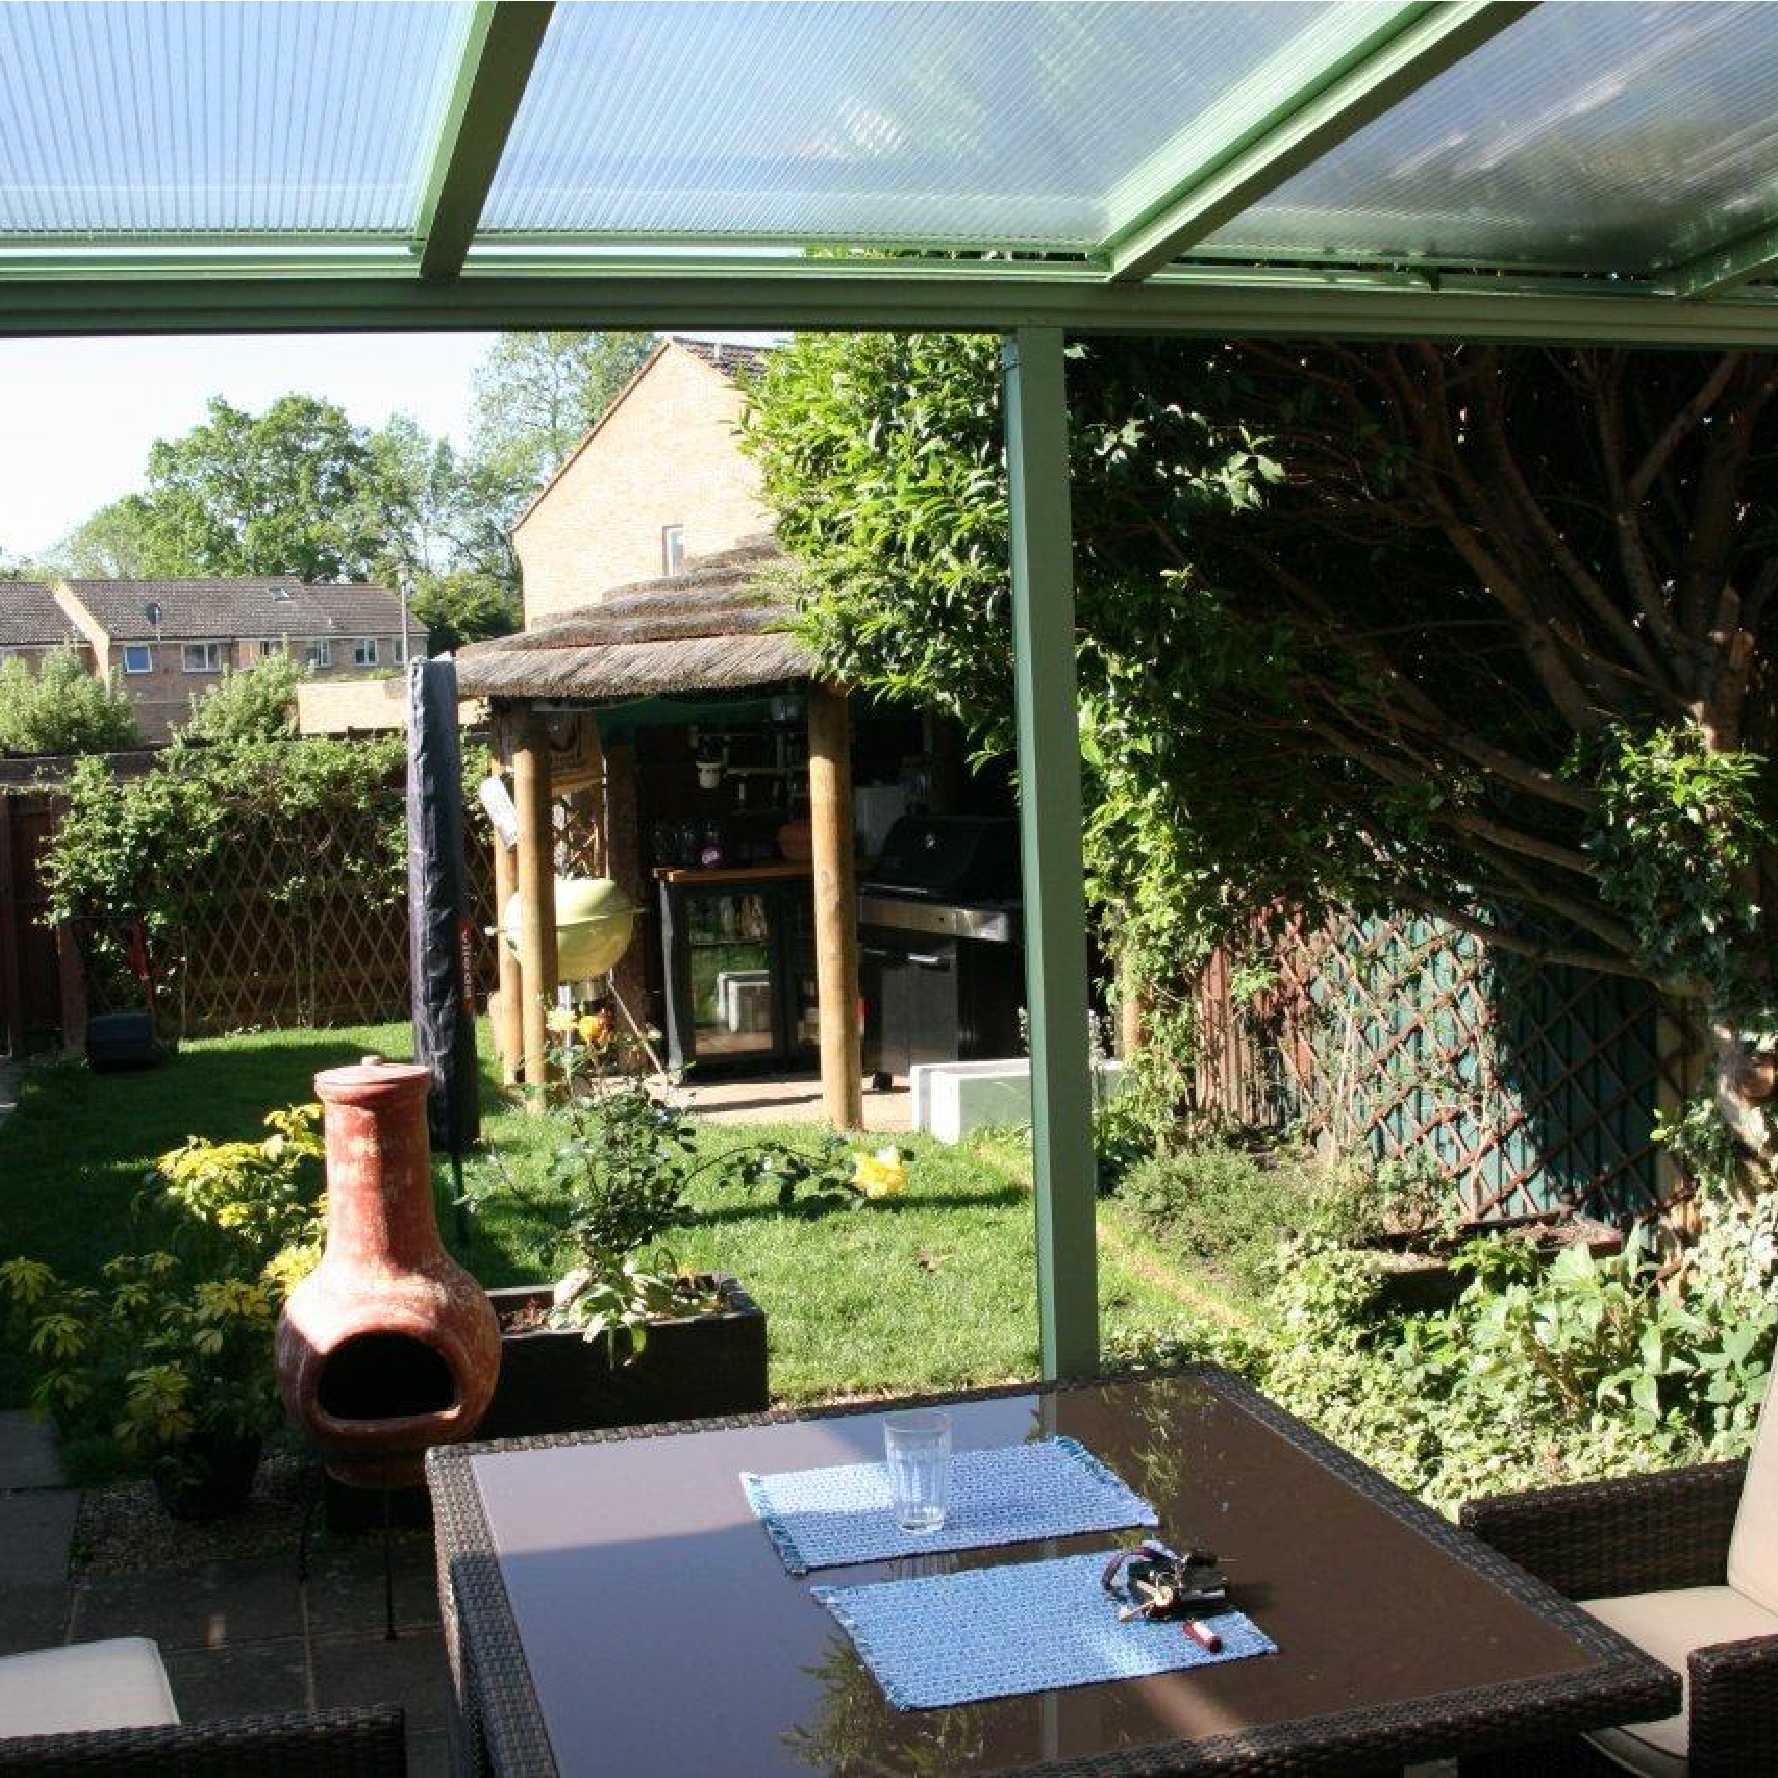 Affordable Omega Smart Lean-To Canopy, White with 16mm Polycarbonate Glazing - 2.1m (W) x 2.5m (P), (2) Supporting Posts